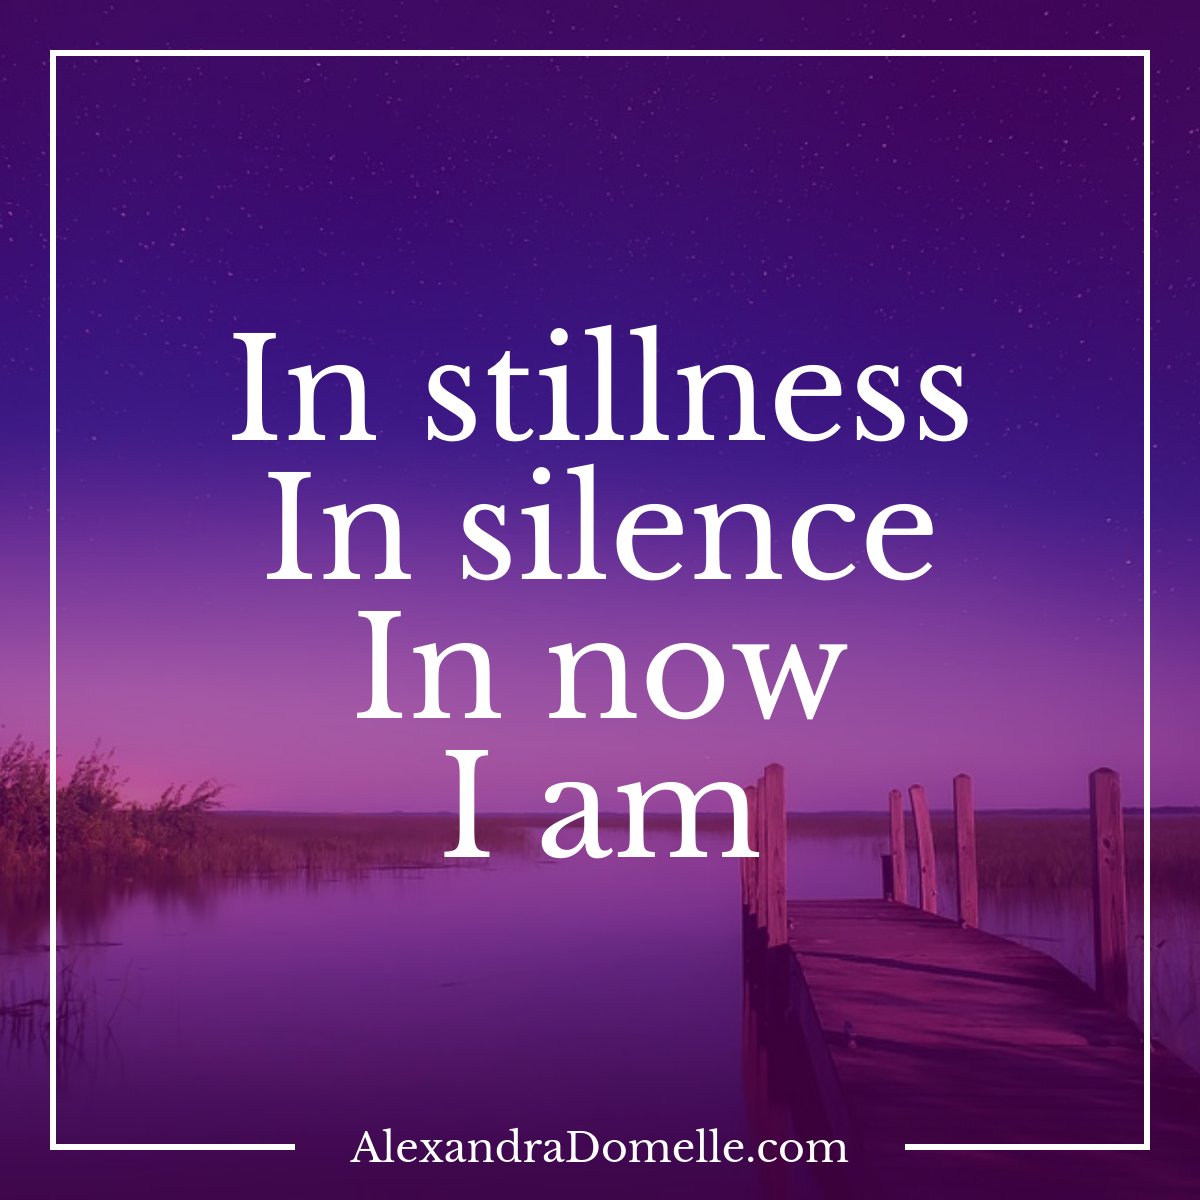 In stillness, in silence, in Now, I am. - Alexandra Domelle #quote #wisdom #PresentMomentReminder